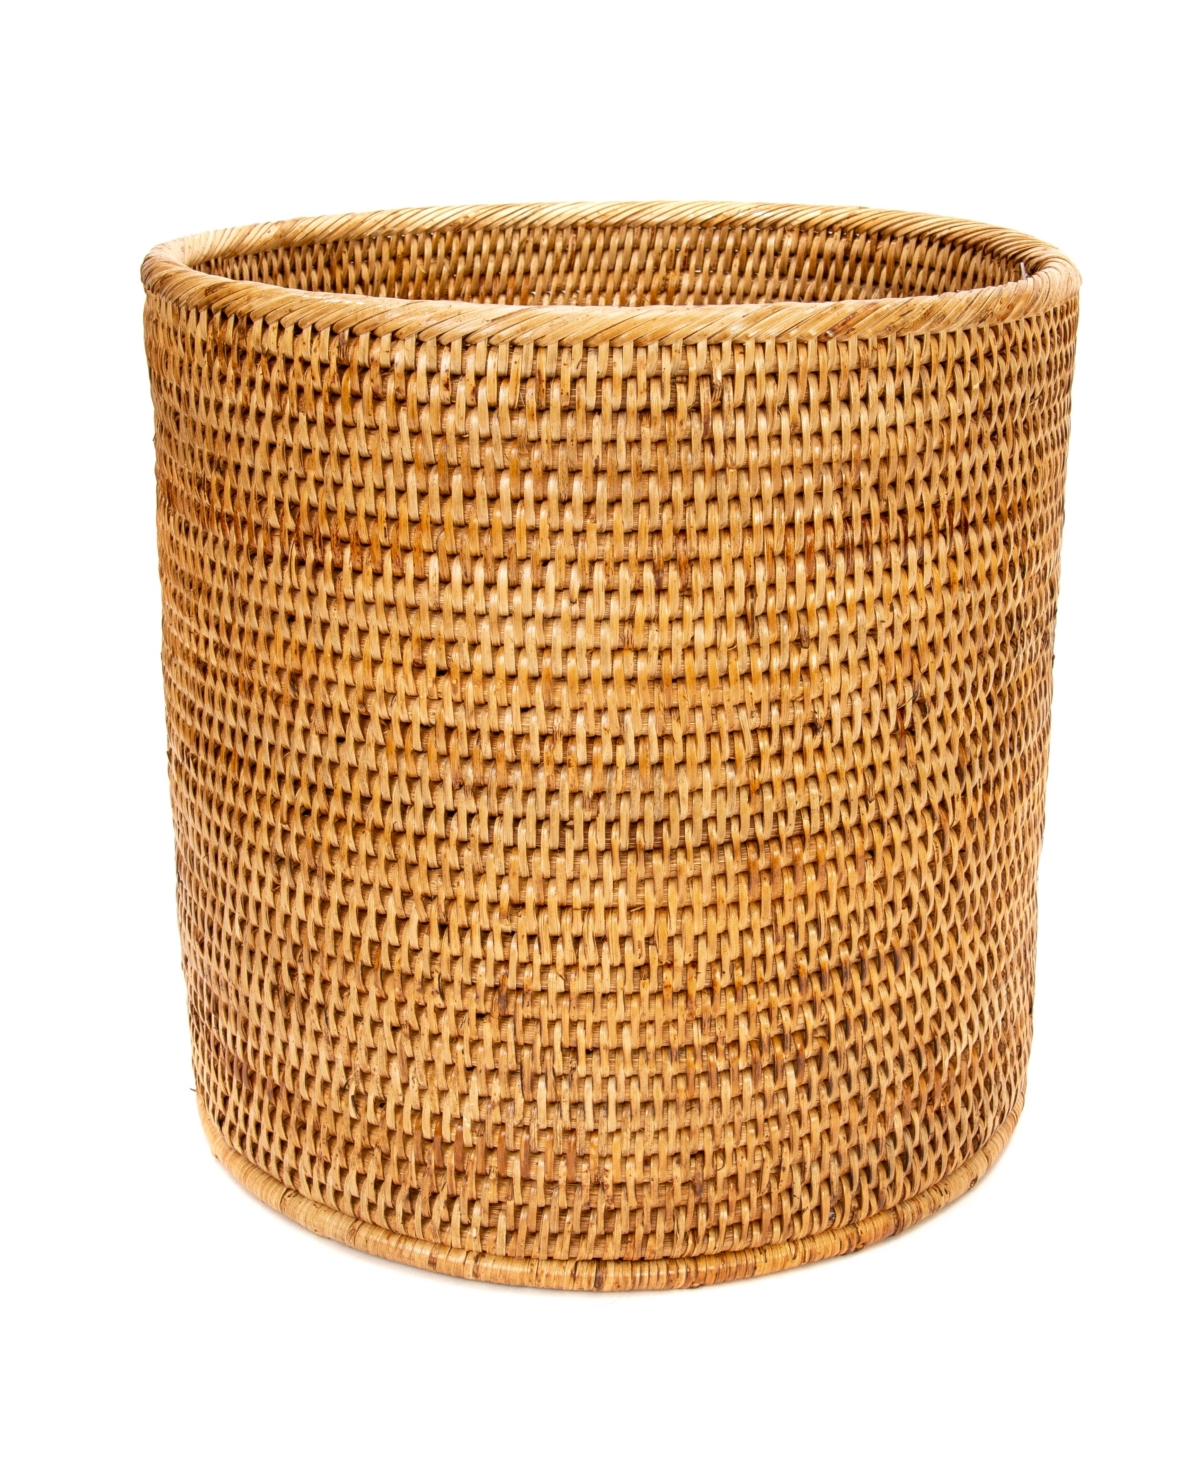 Artifacts Trading Company Artifacts Rattan Round Waste Basket In Honey Brown